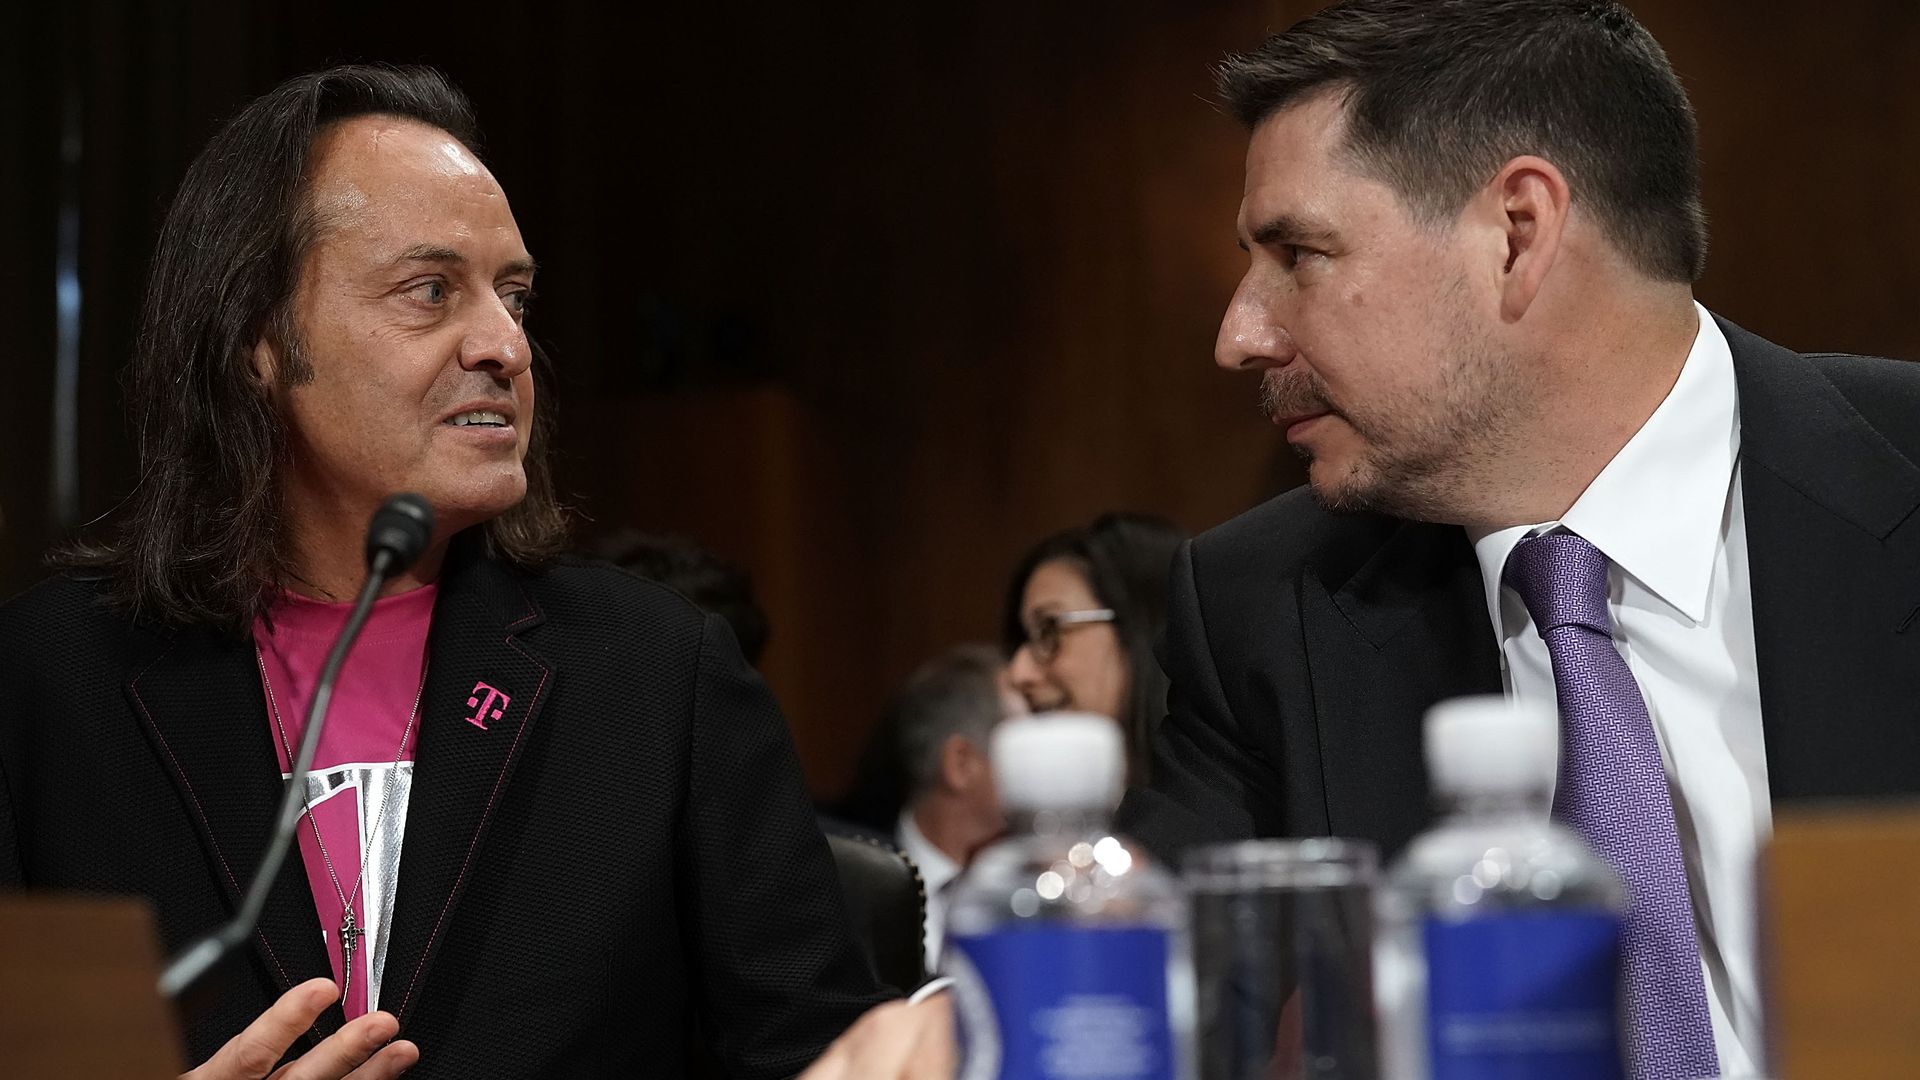 The chief executives of T-Mobile and Sprint